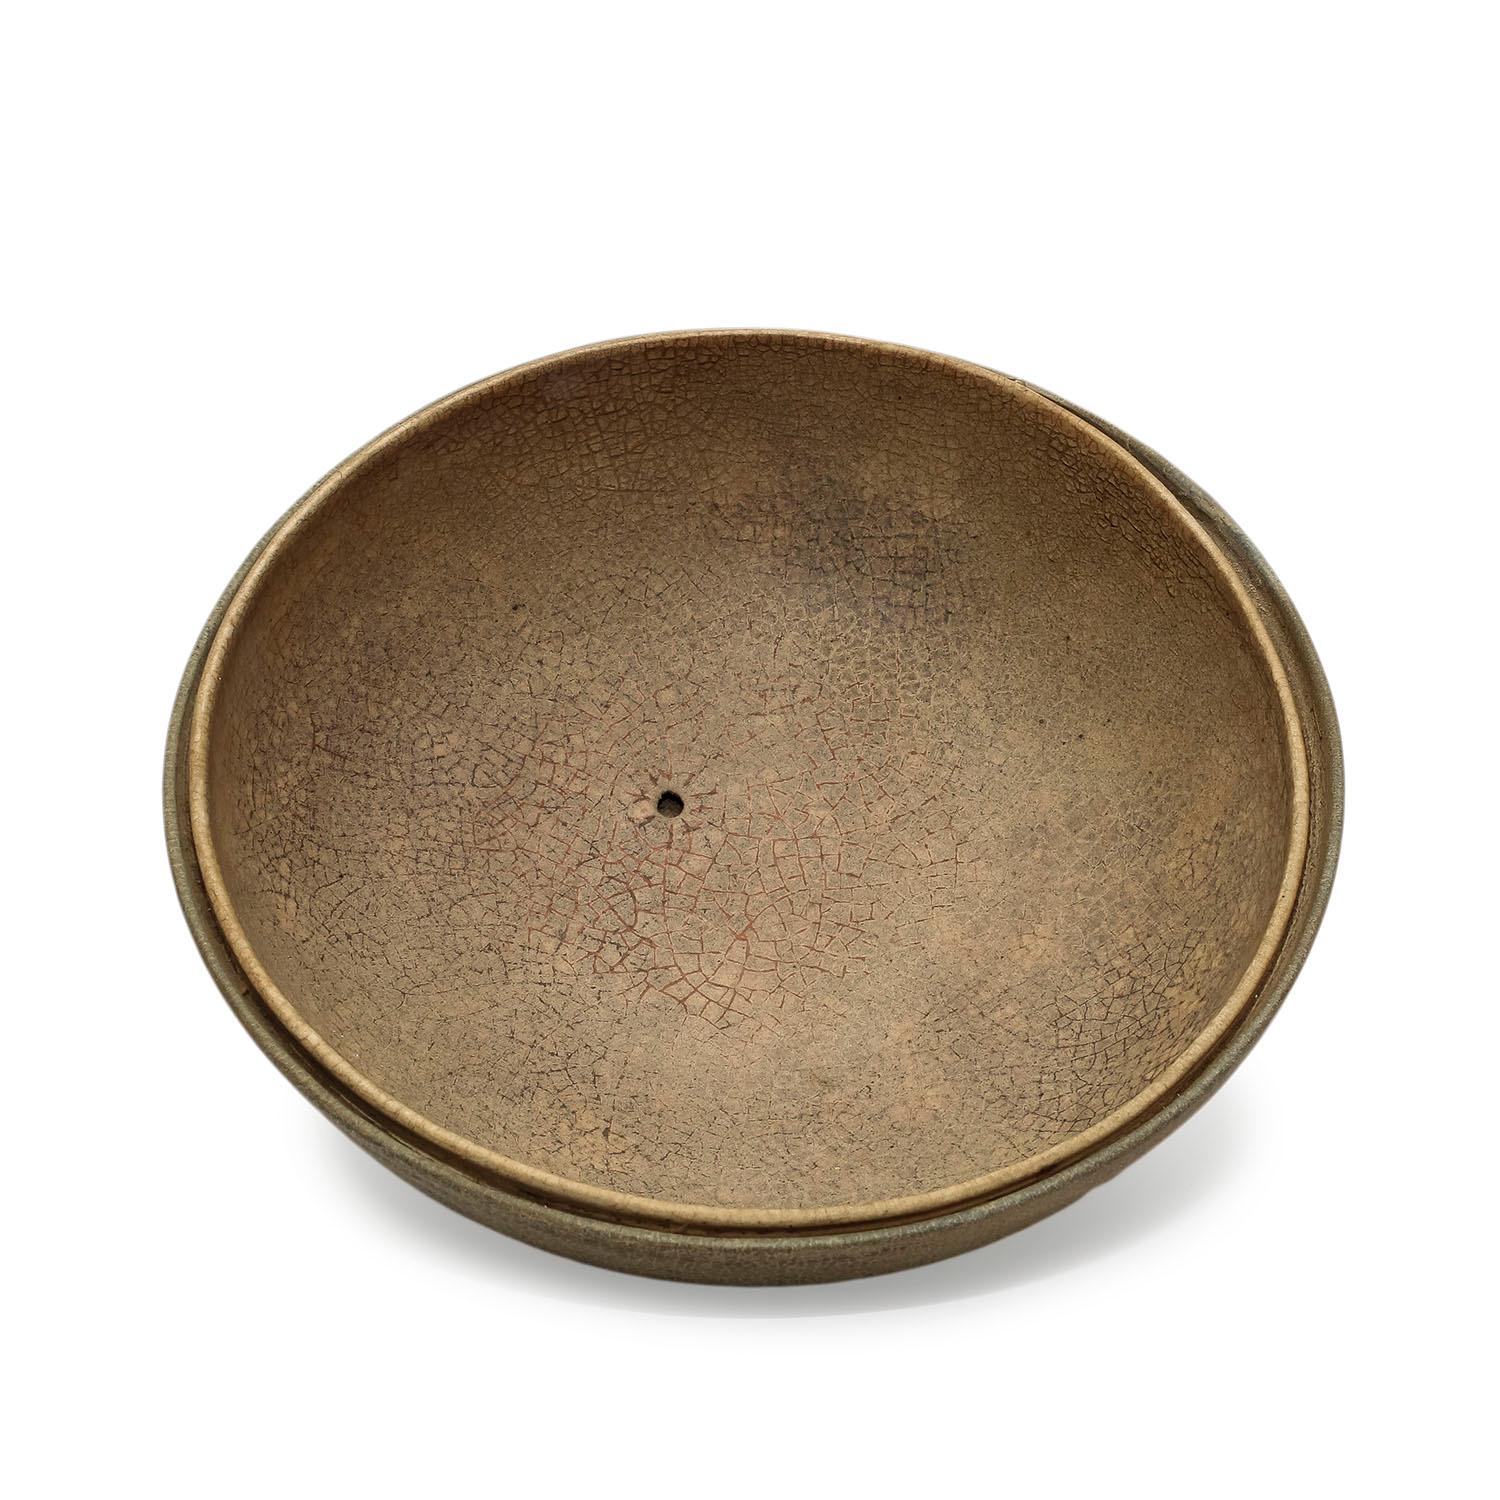 "Untitled" Large Double Bowl with Hole by Richard DeVore (INV. #NP2550) - Art by Richard Devore